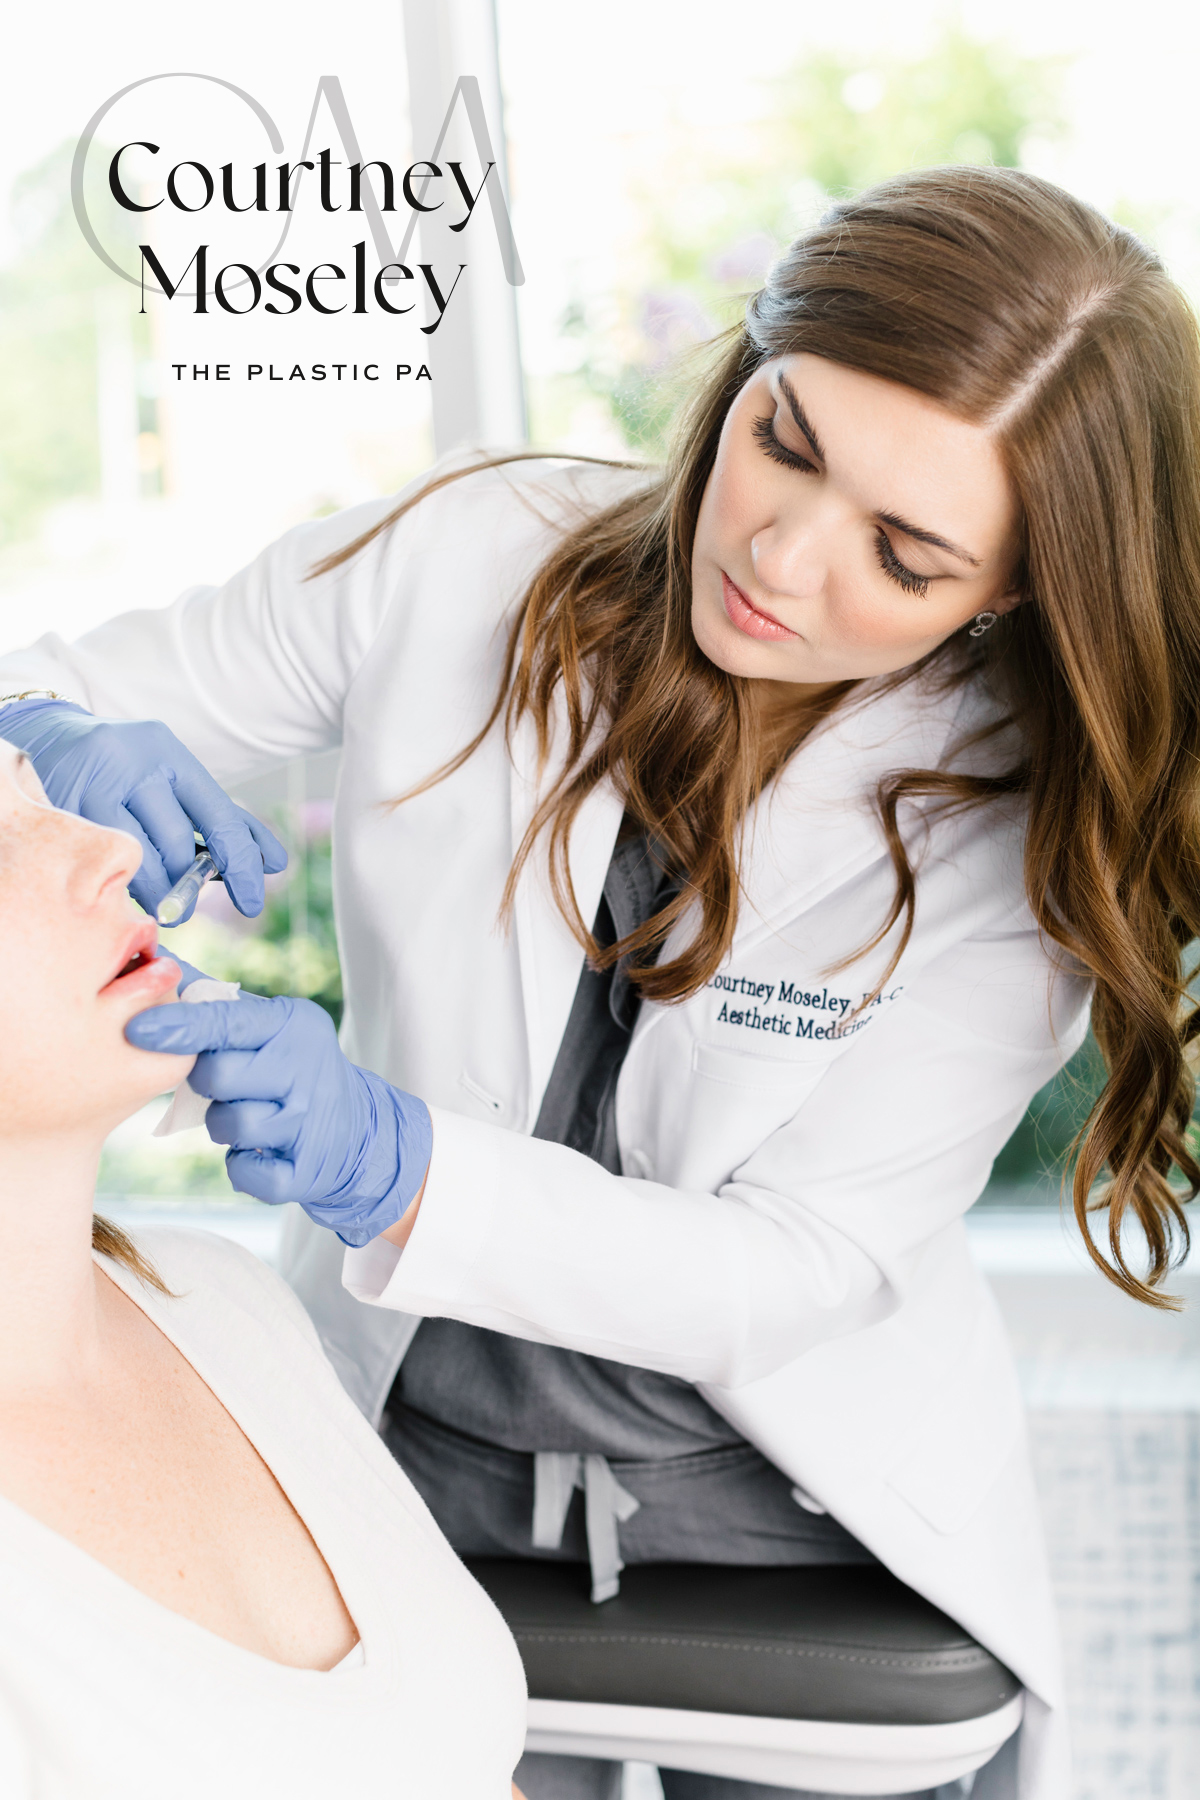 physician associate logo on image of her injecting a client with dermal fillers